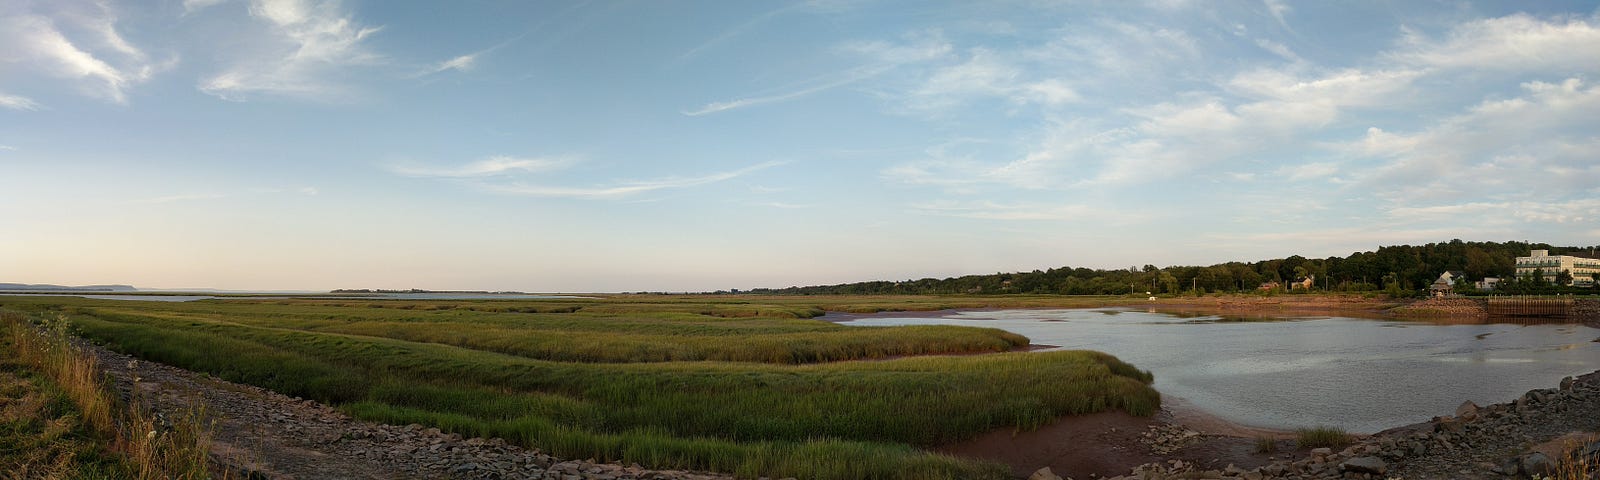 Green marshlands sweeping towards a body of water.